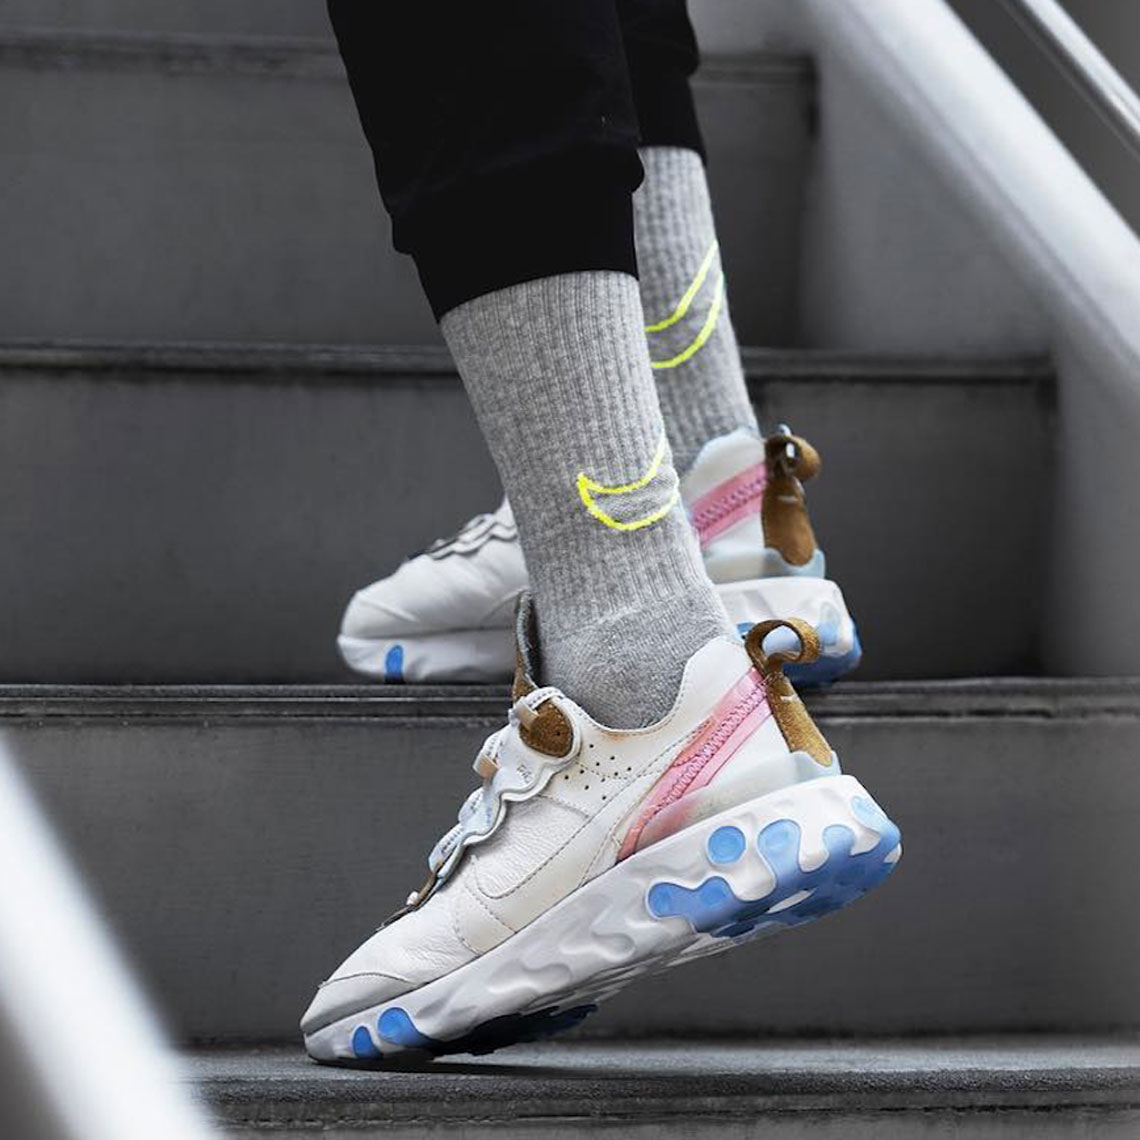 The Shoe Nike Element 87 Leather |